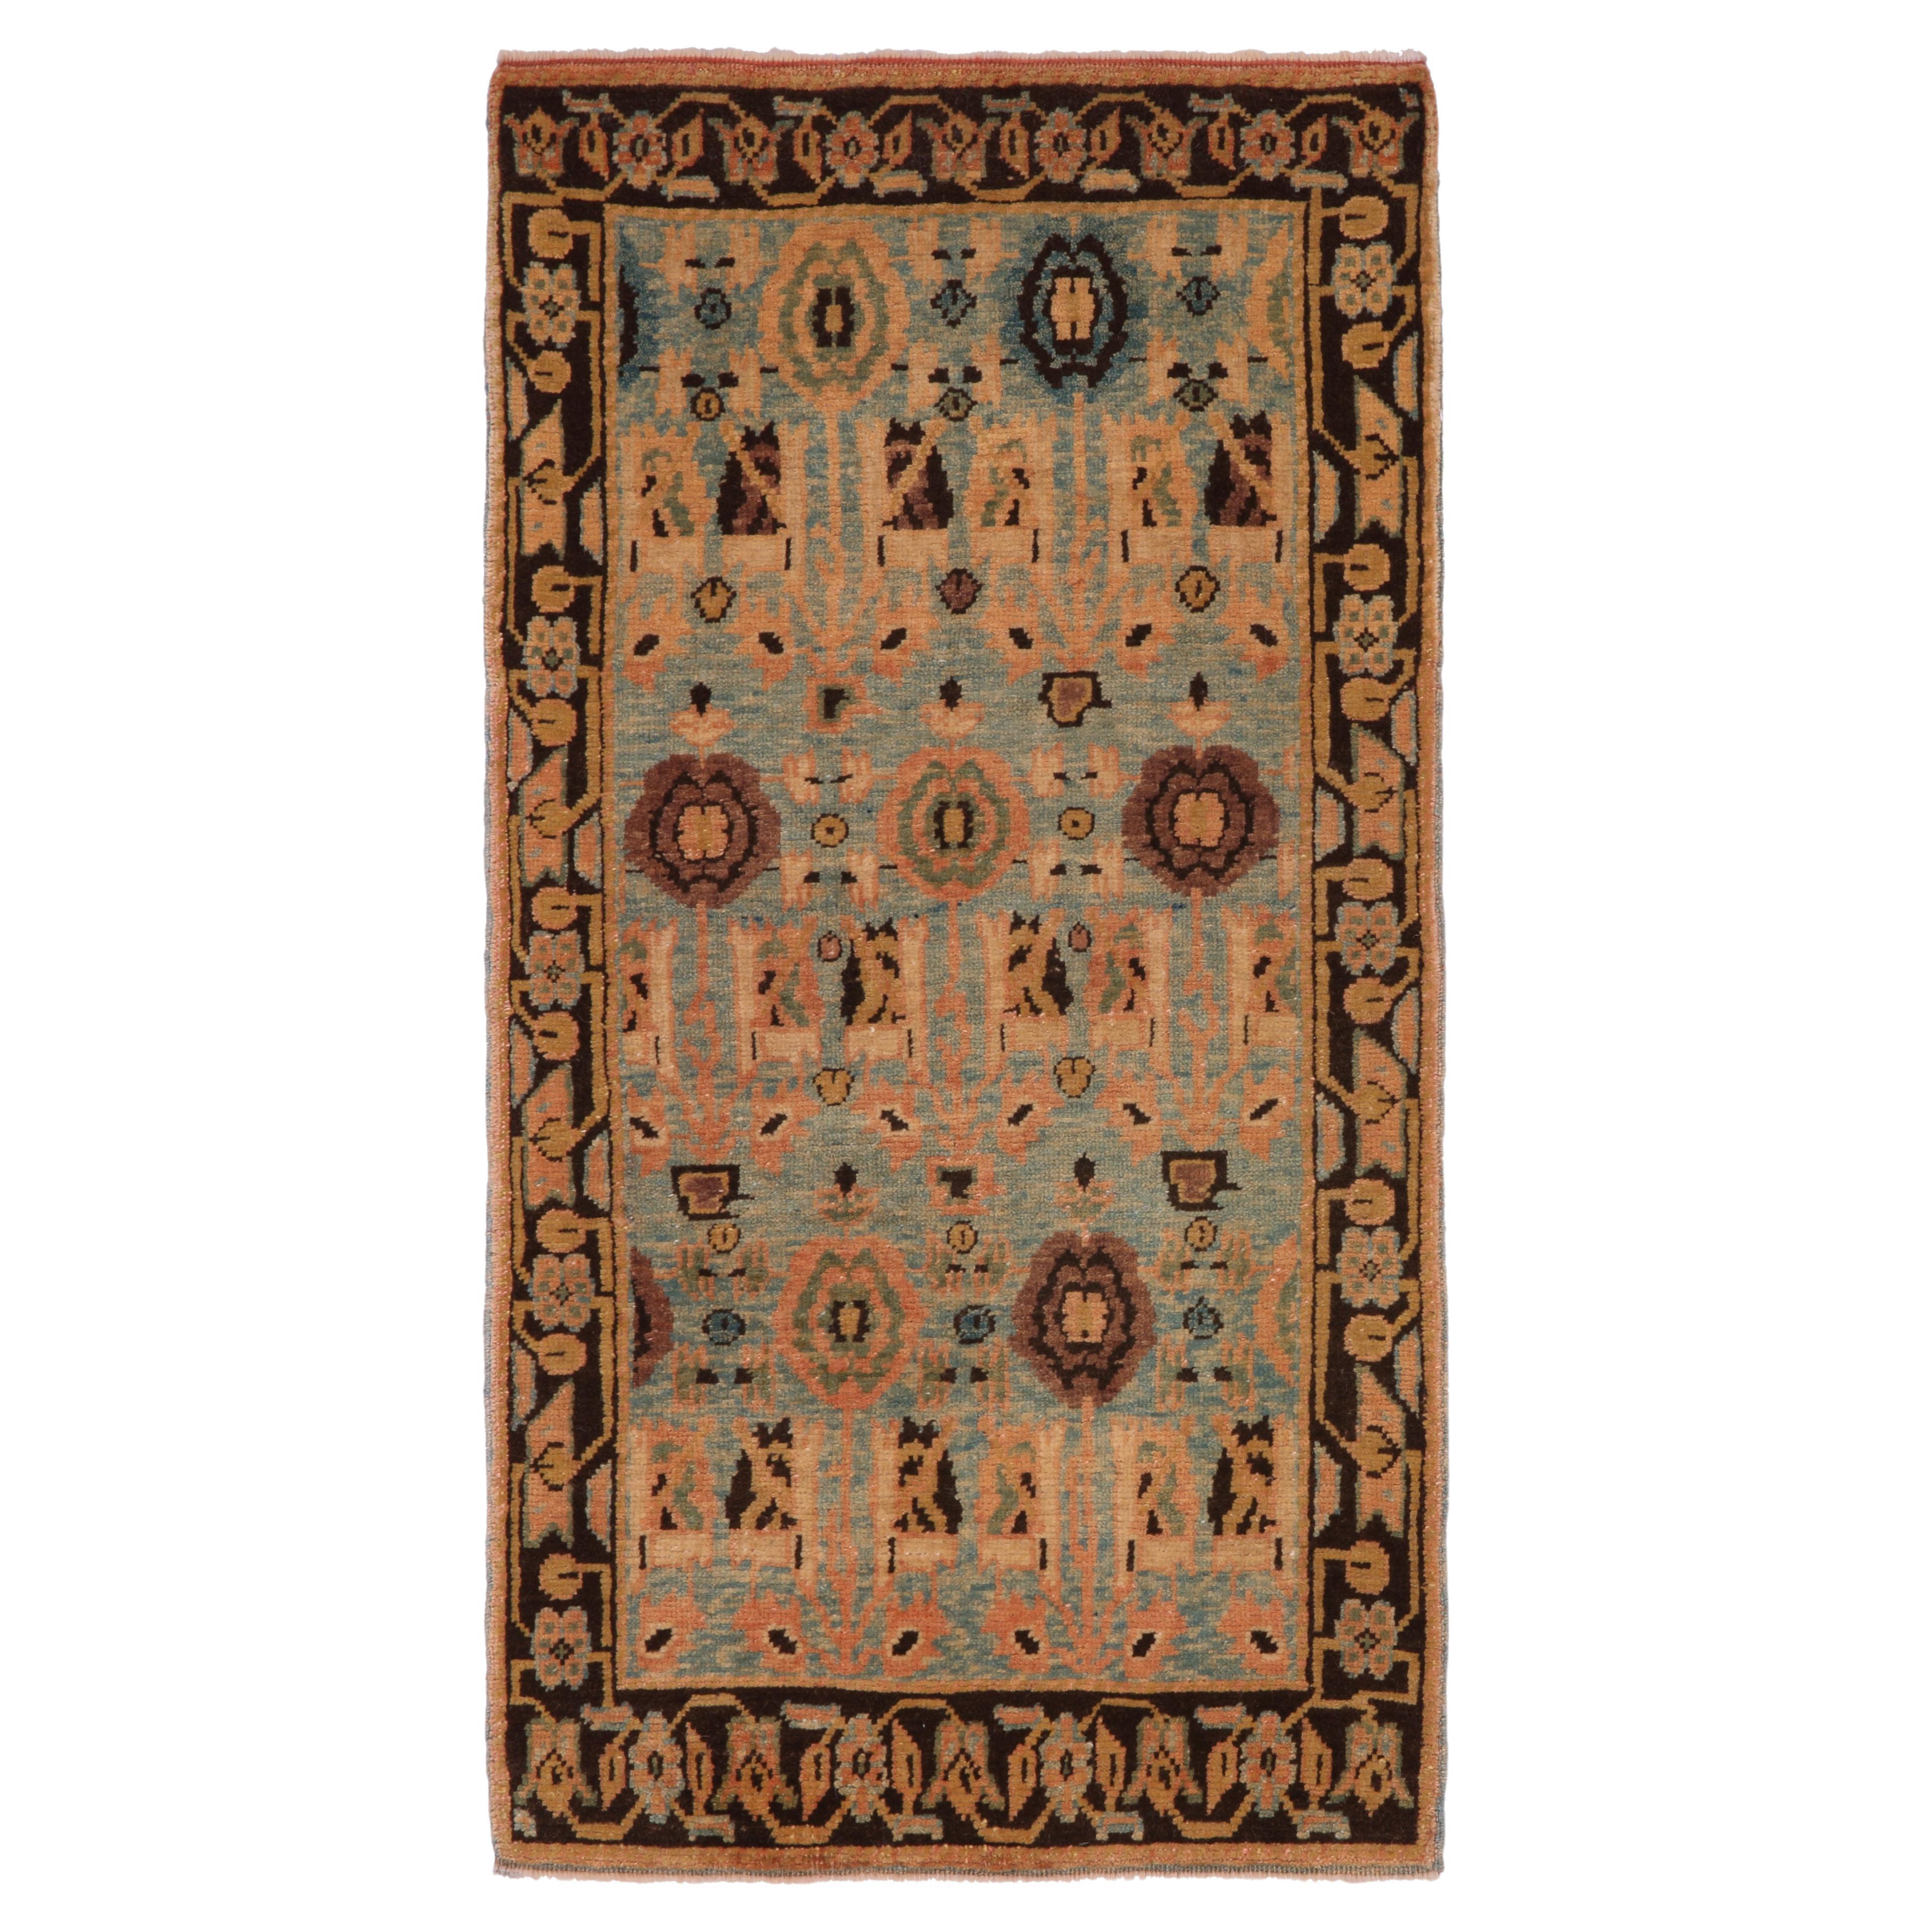 Ararat Rugs Senna Rows of Flowers Rug Wagireh Revival Carpet Natural Dyed For Sale